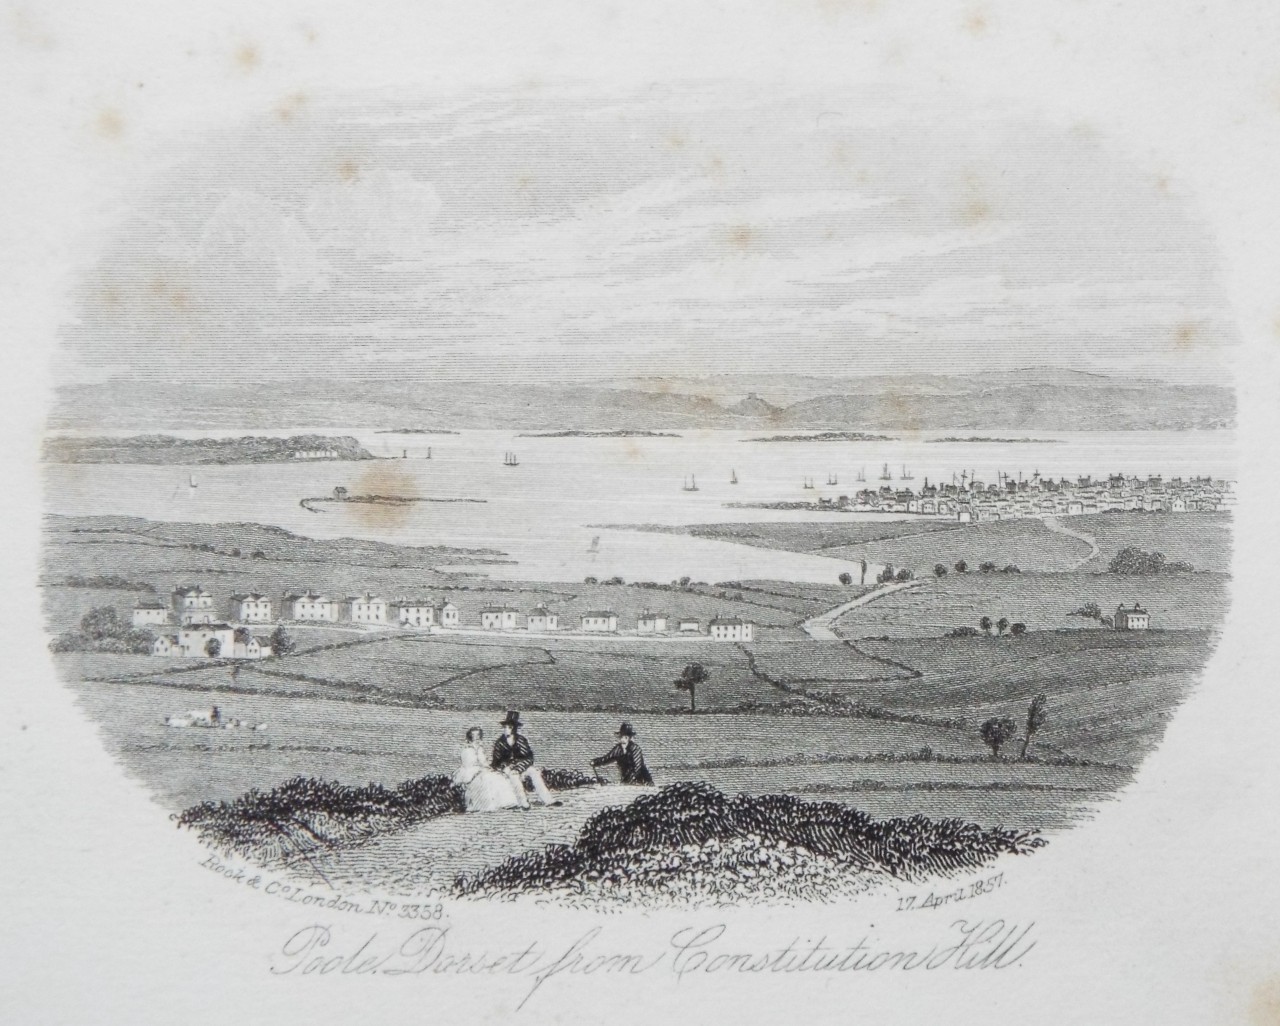 Steel Vignette - Poole, Dorset, from Constitution Hill. - Rock